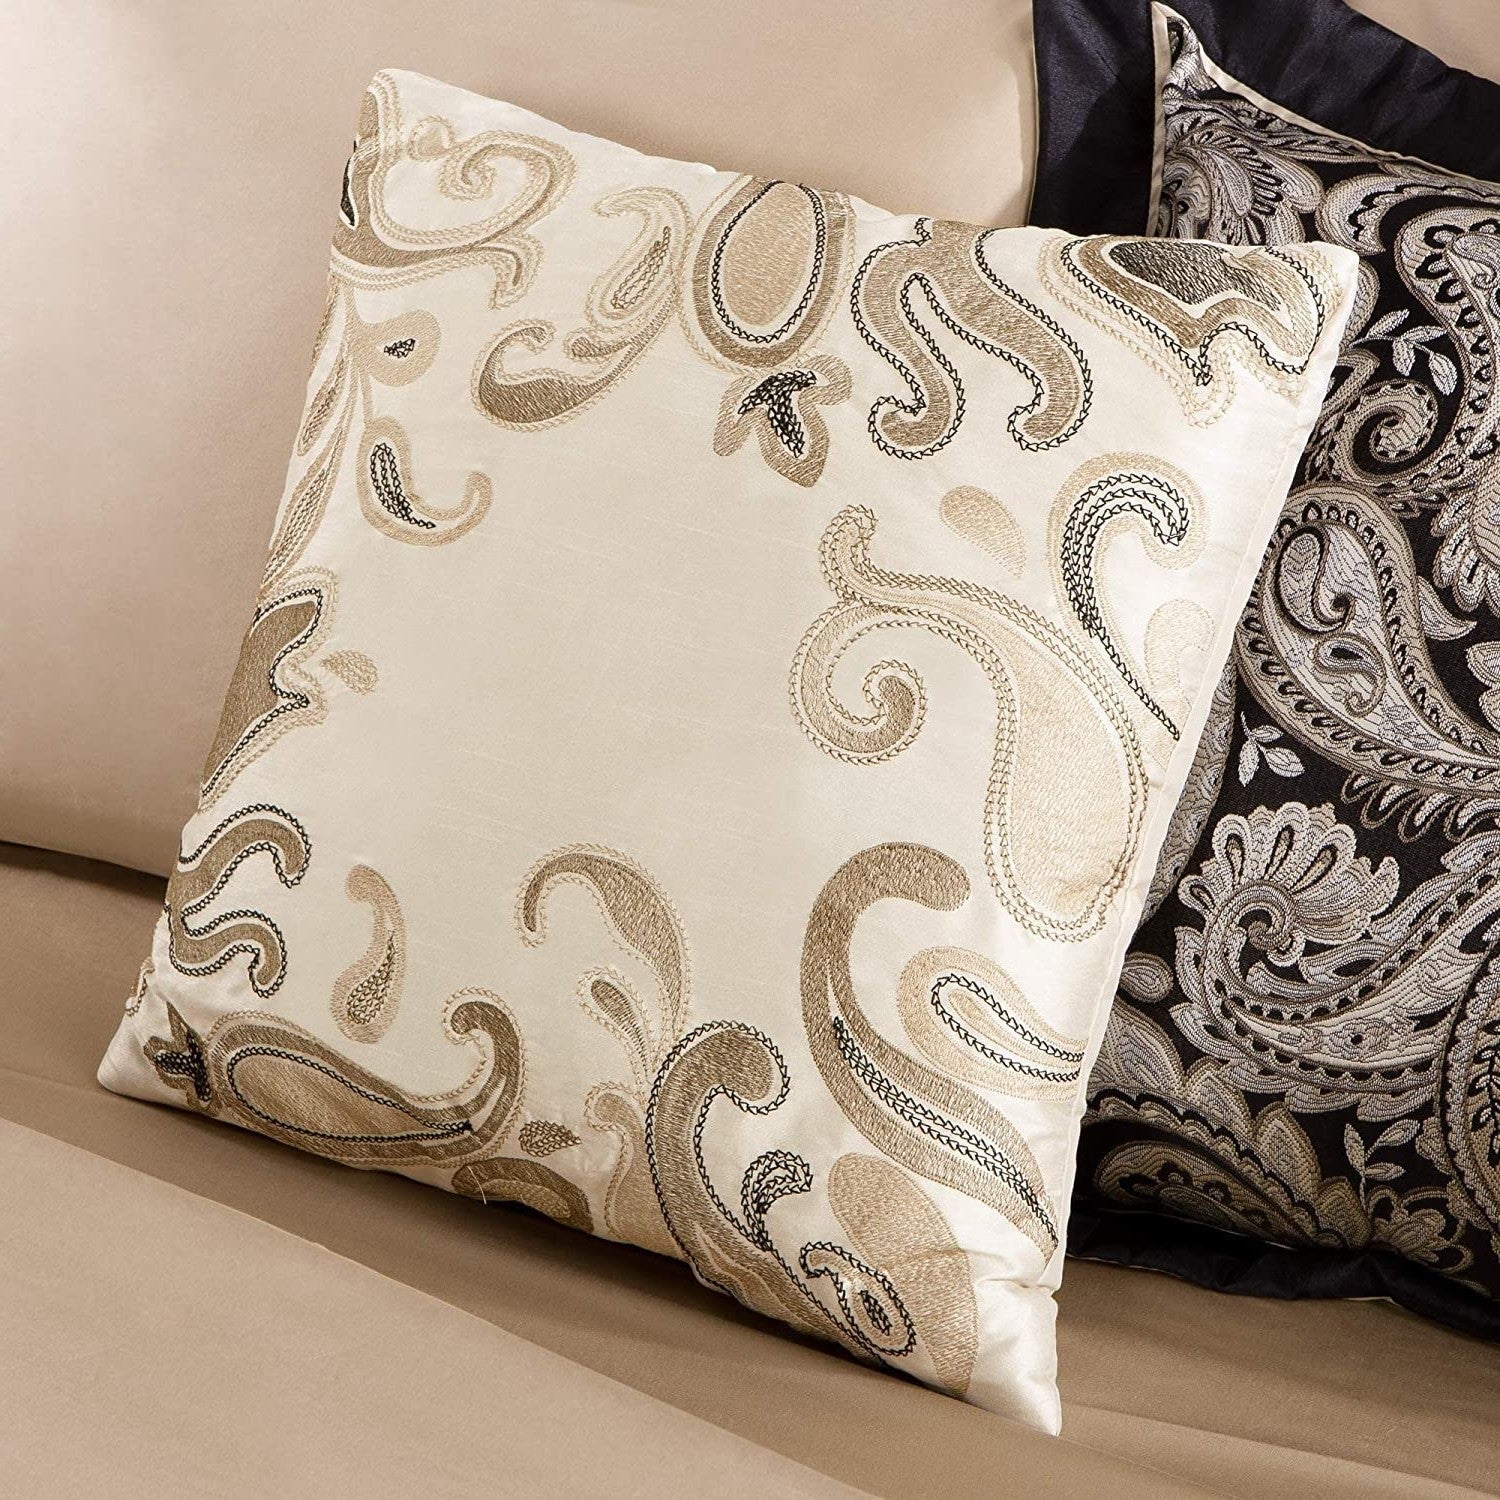 Bedroom > Comforters And Sets - Queen 12 Piece Cotton Polyester Comforter Set Black Gold Paisley